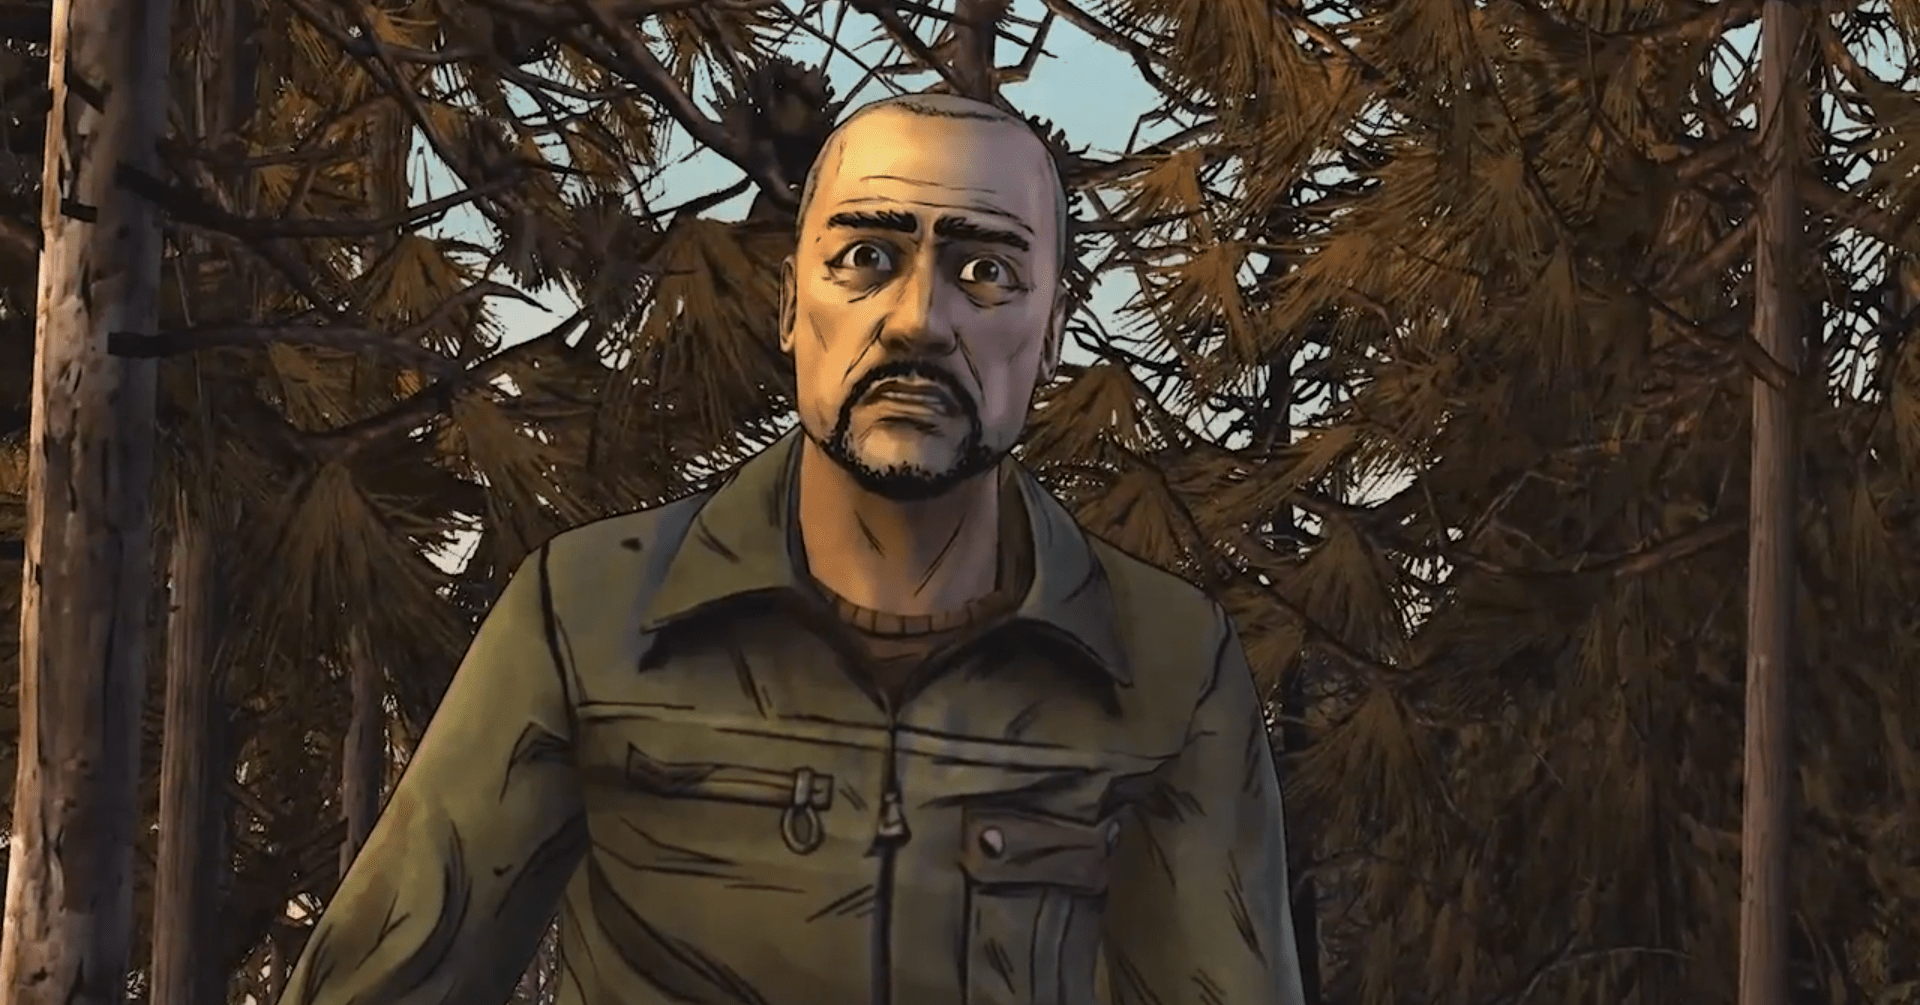 The 5 Worst Moments In The New Walking Dead, With Spoilers